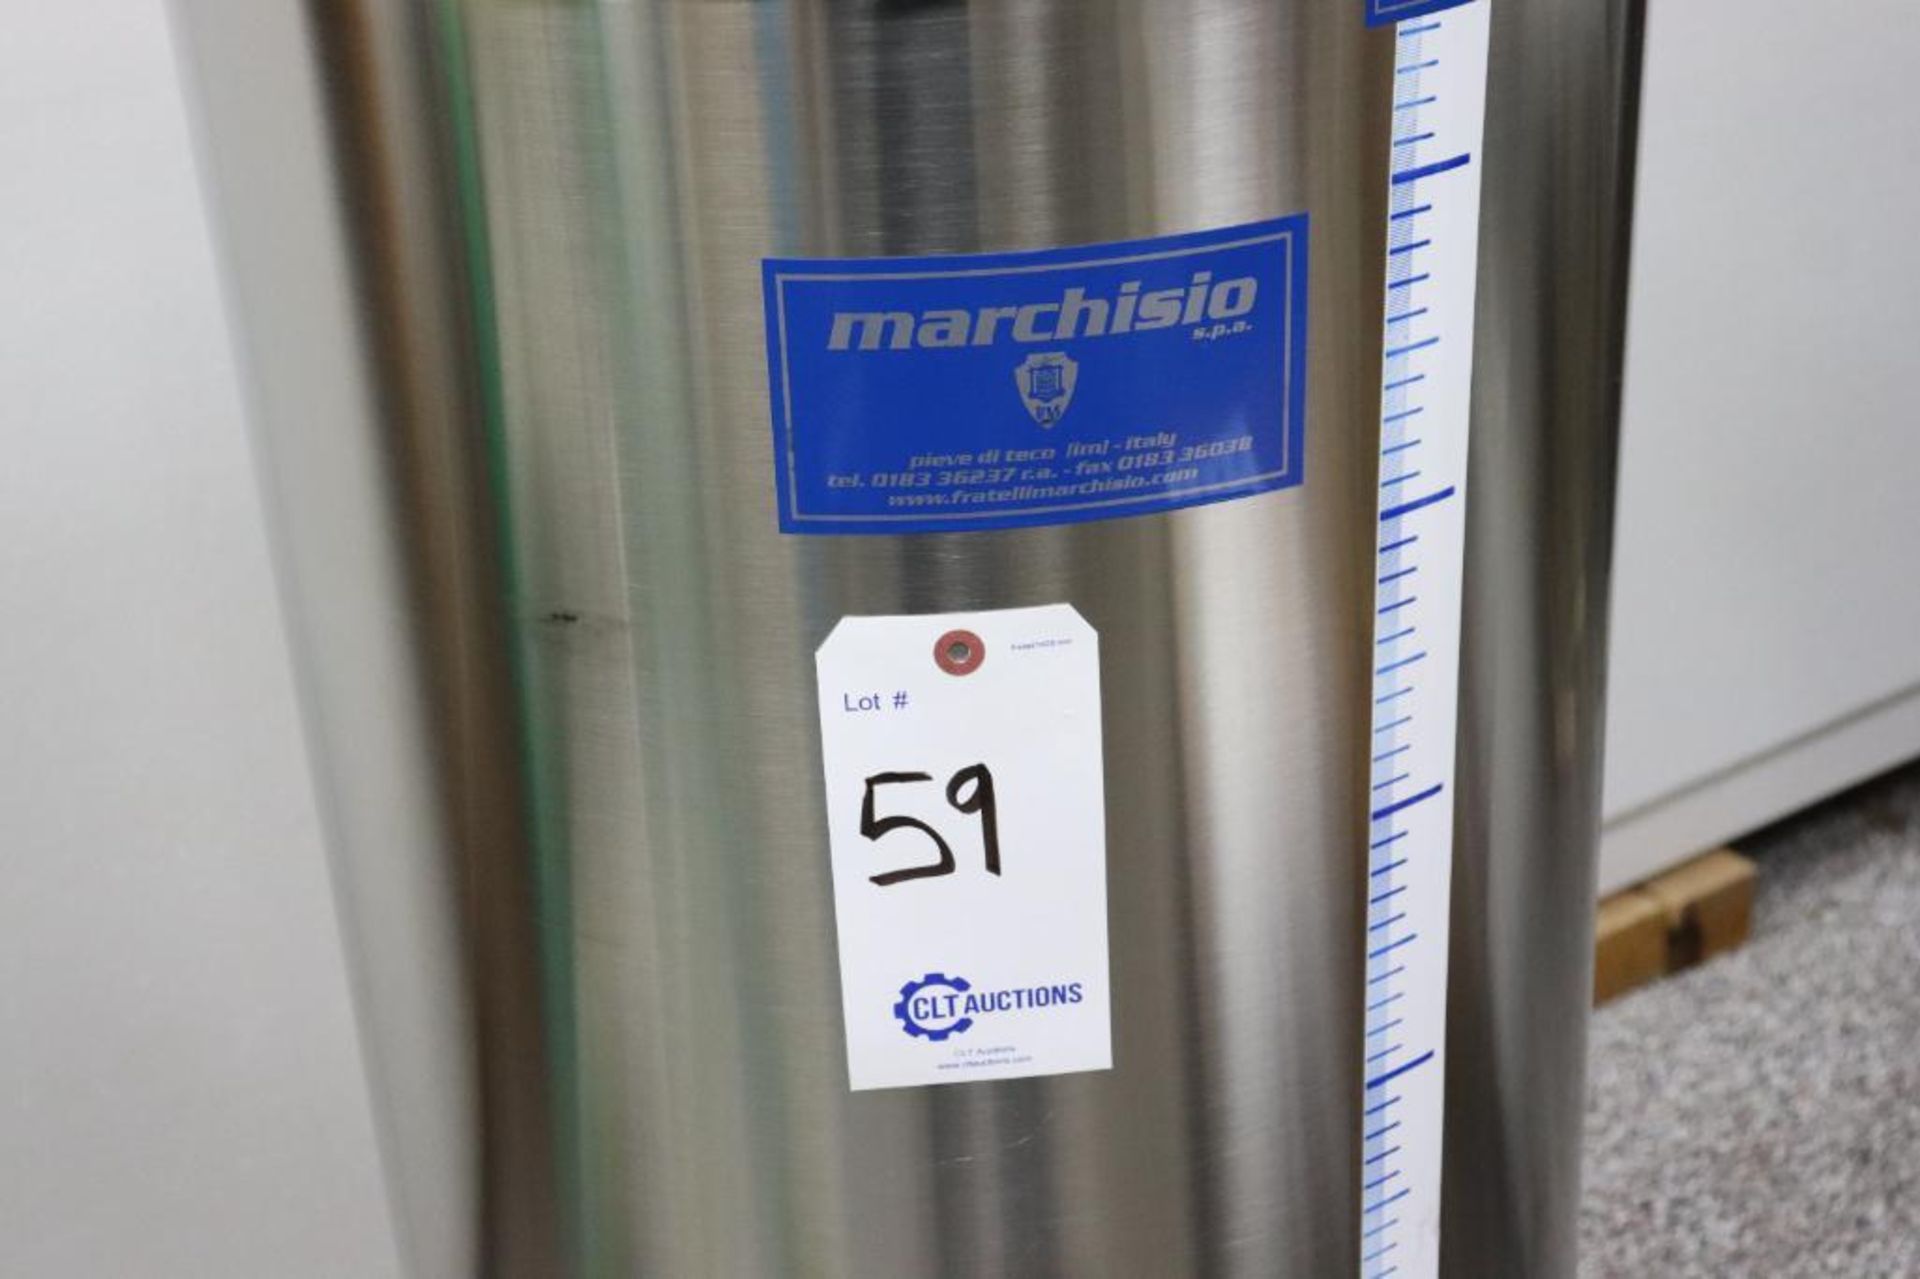 Marchisio 200 L variable capacity fermenting tank - Image 3 of 7